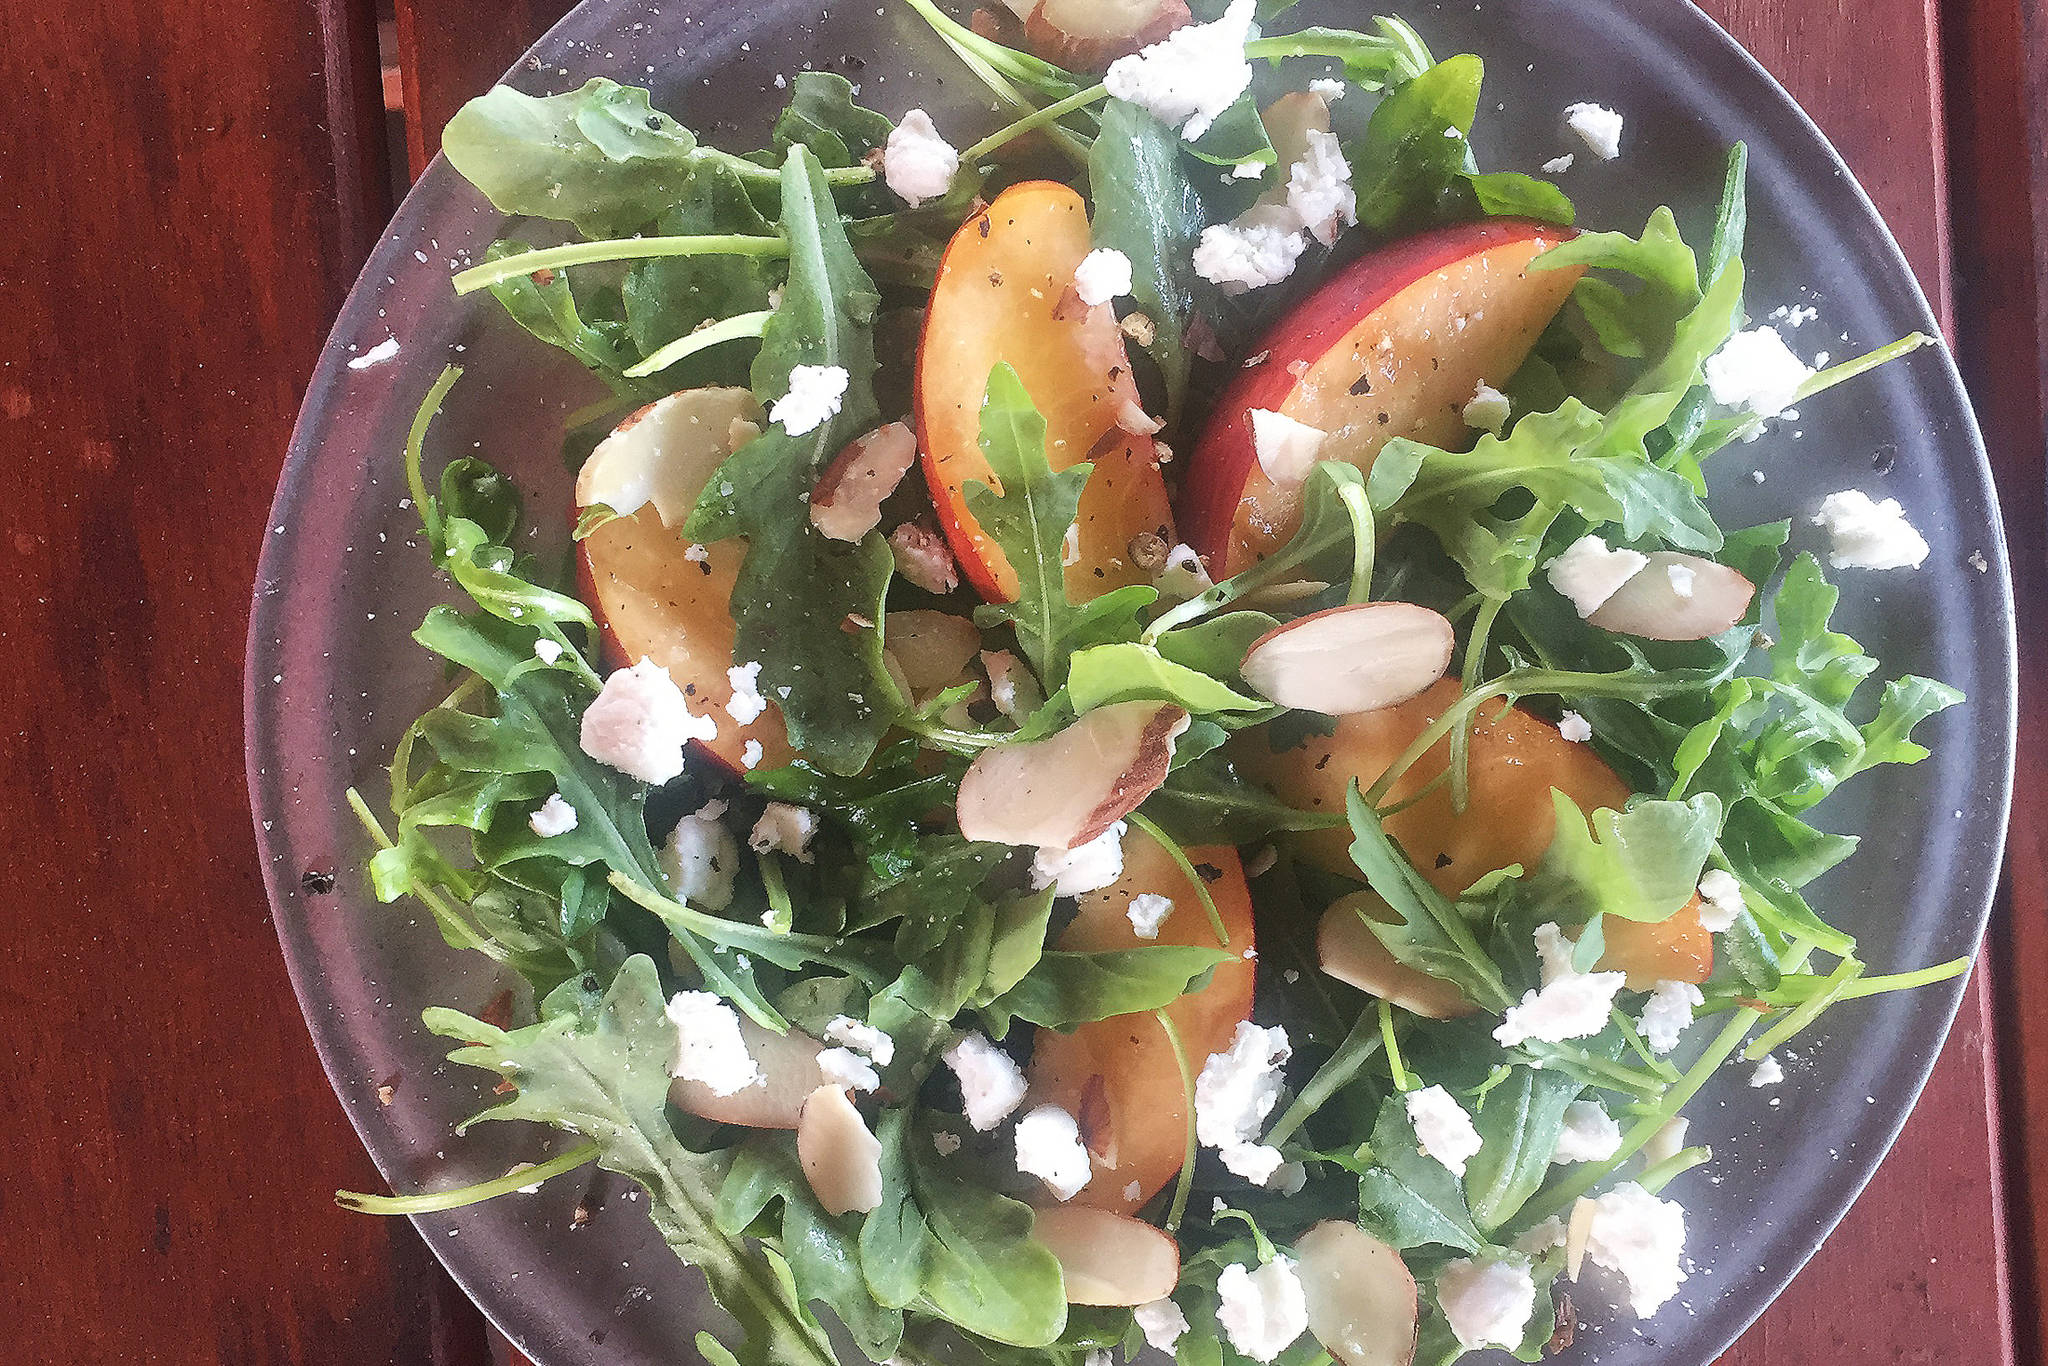 An arugula, peach and goat cheese salad, shown here in Teri Robl’s home in Homer, Alaska. (Photo by Teri Robl)